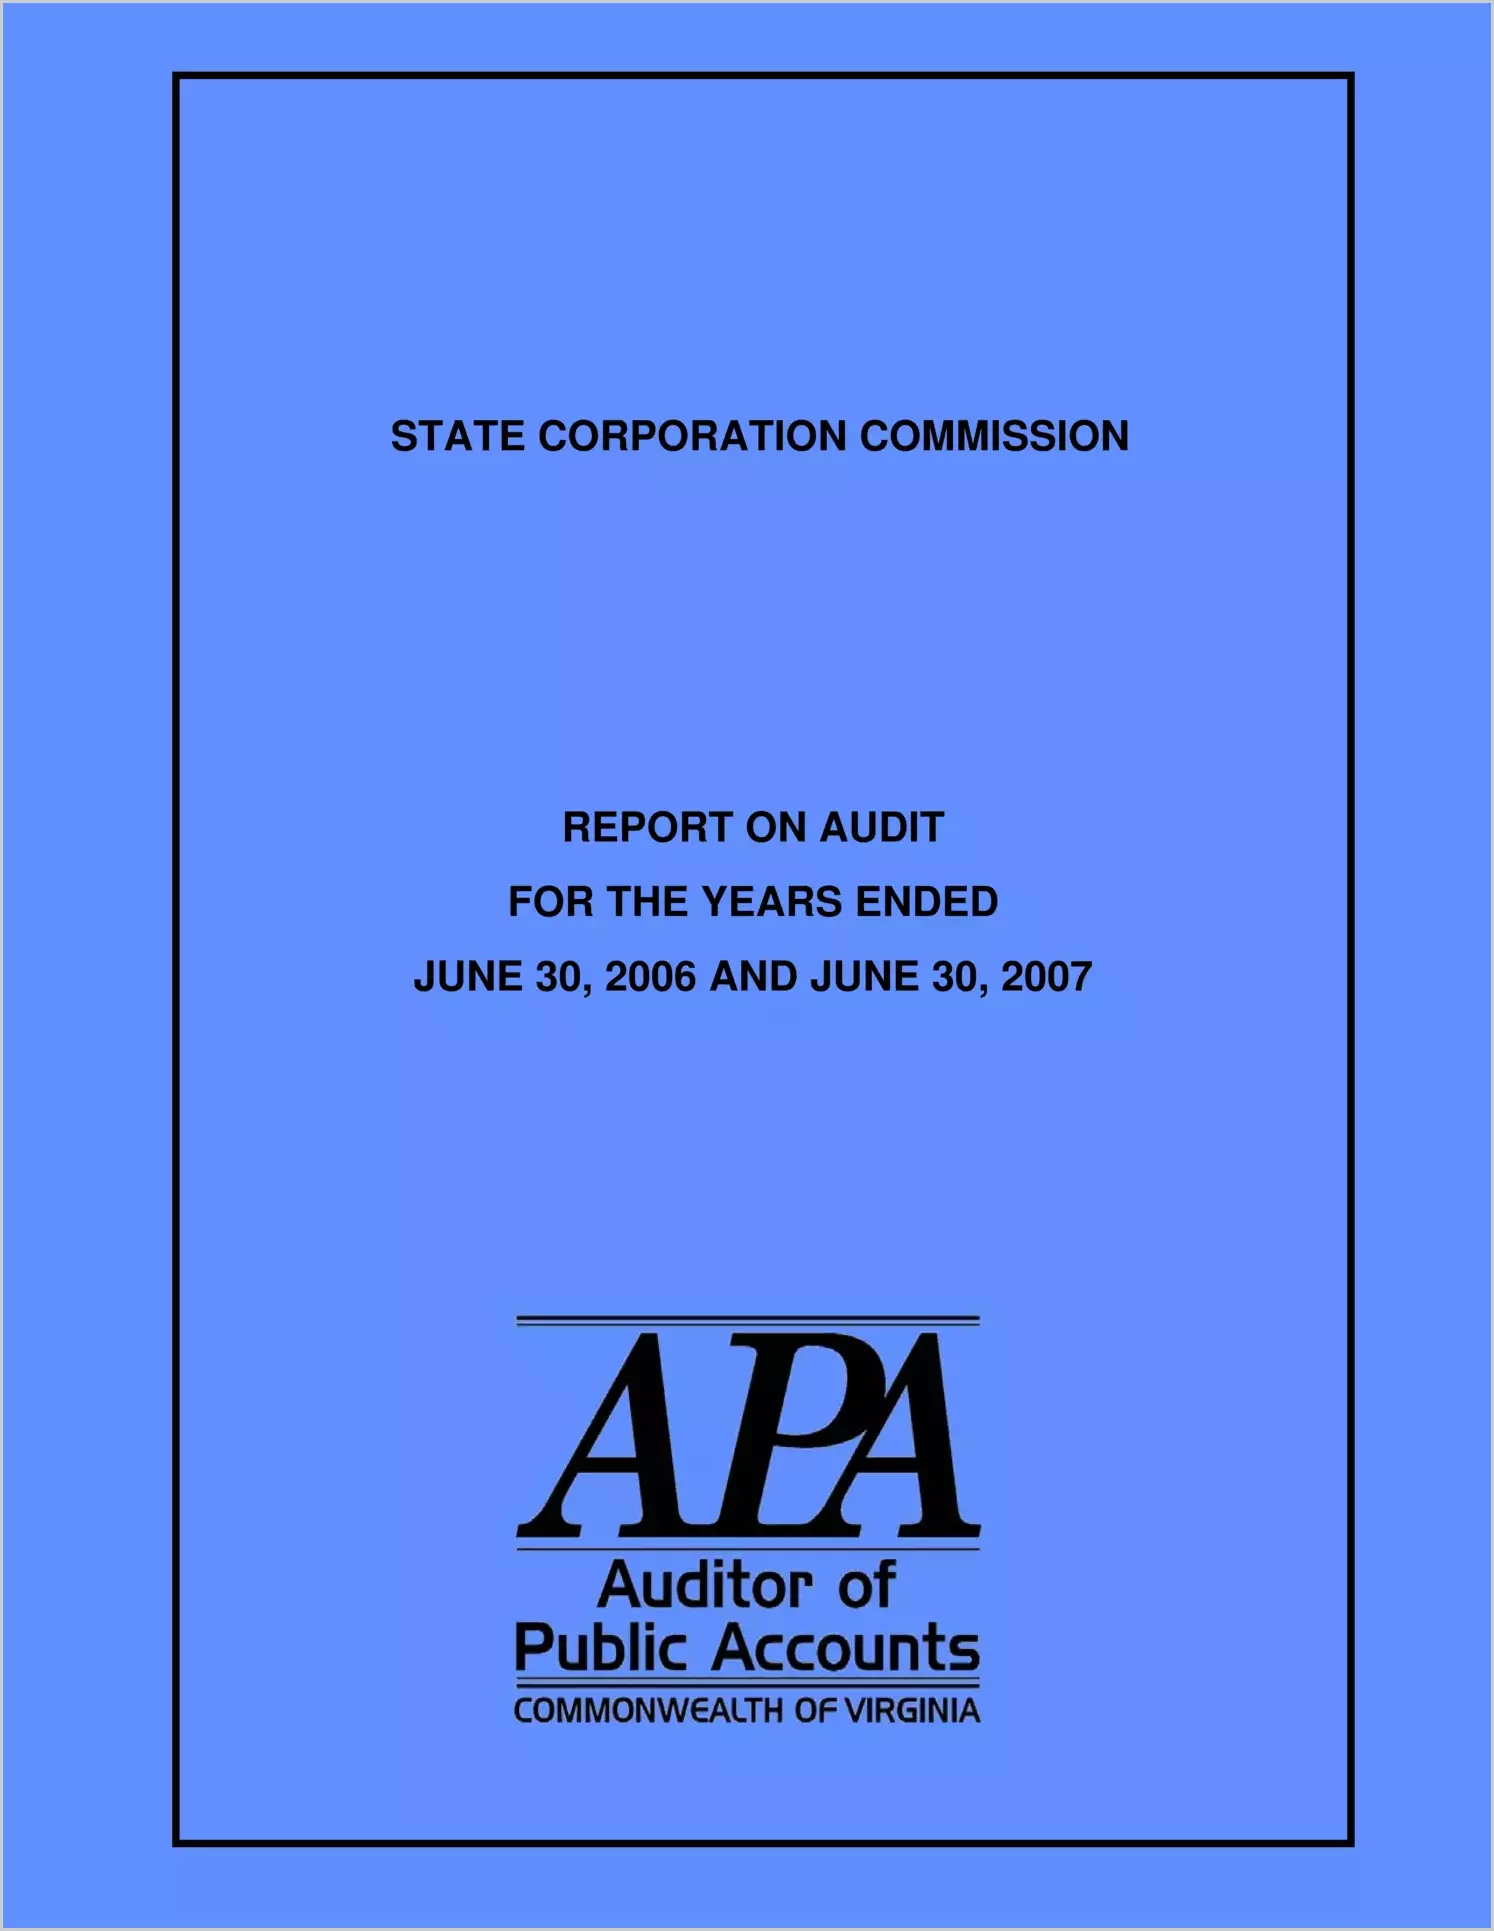 State Corporation Commission for the two-year period ended June 30, 2007